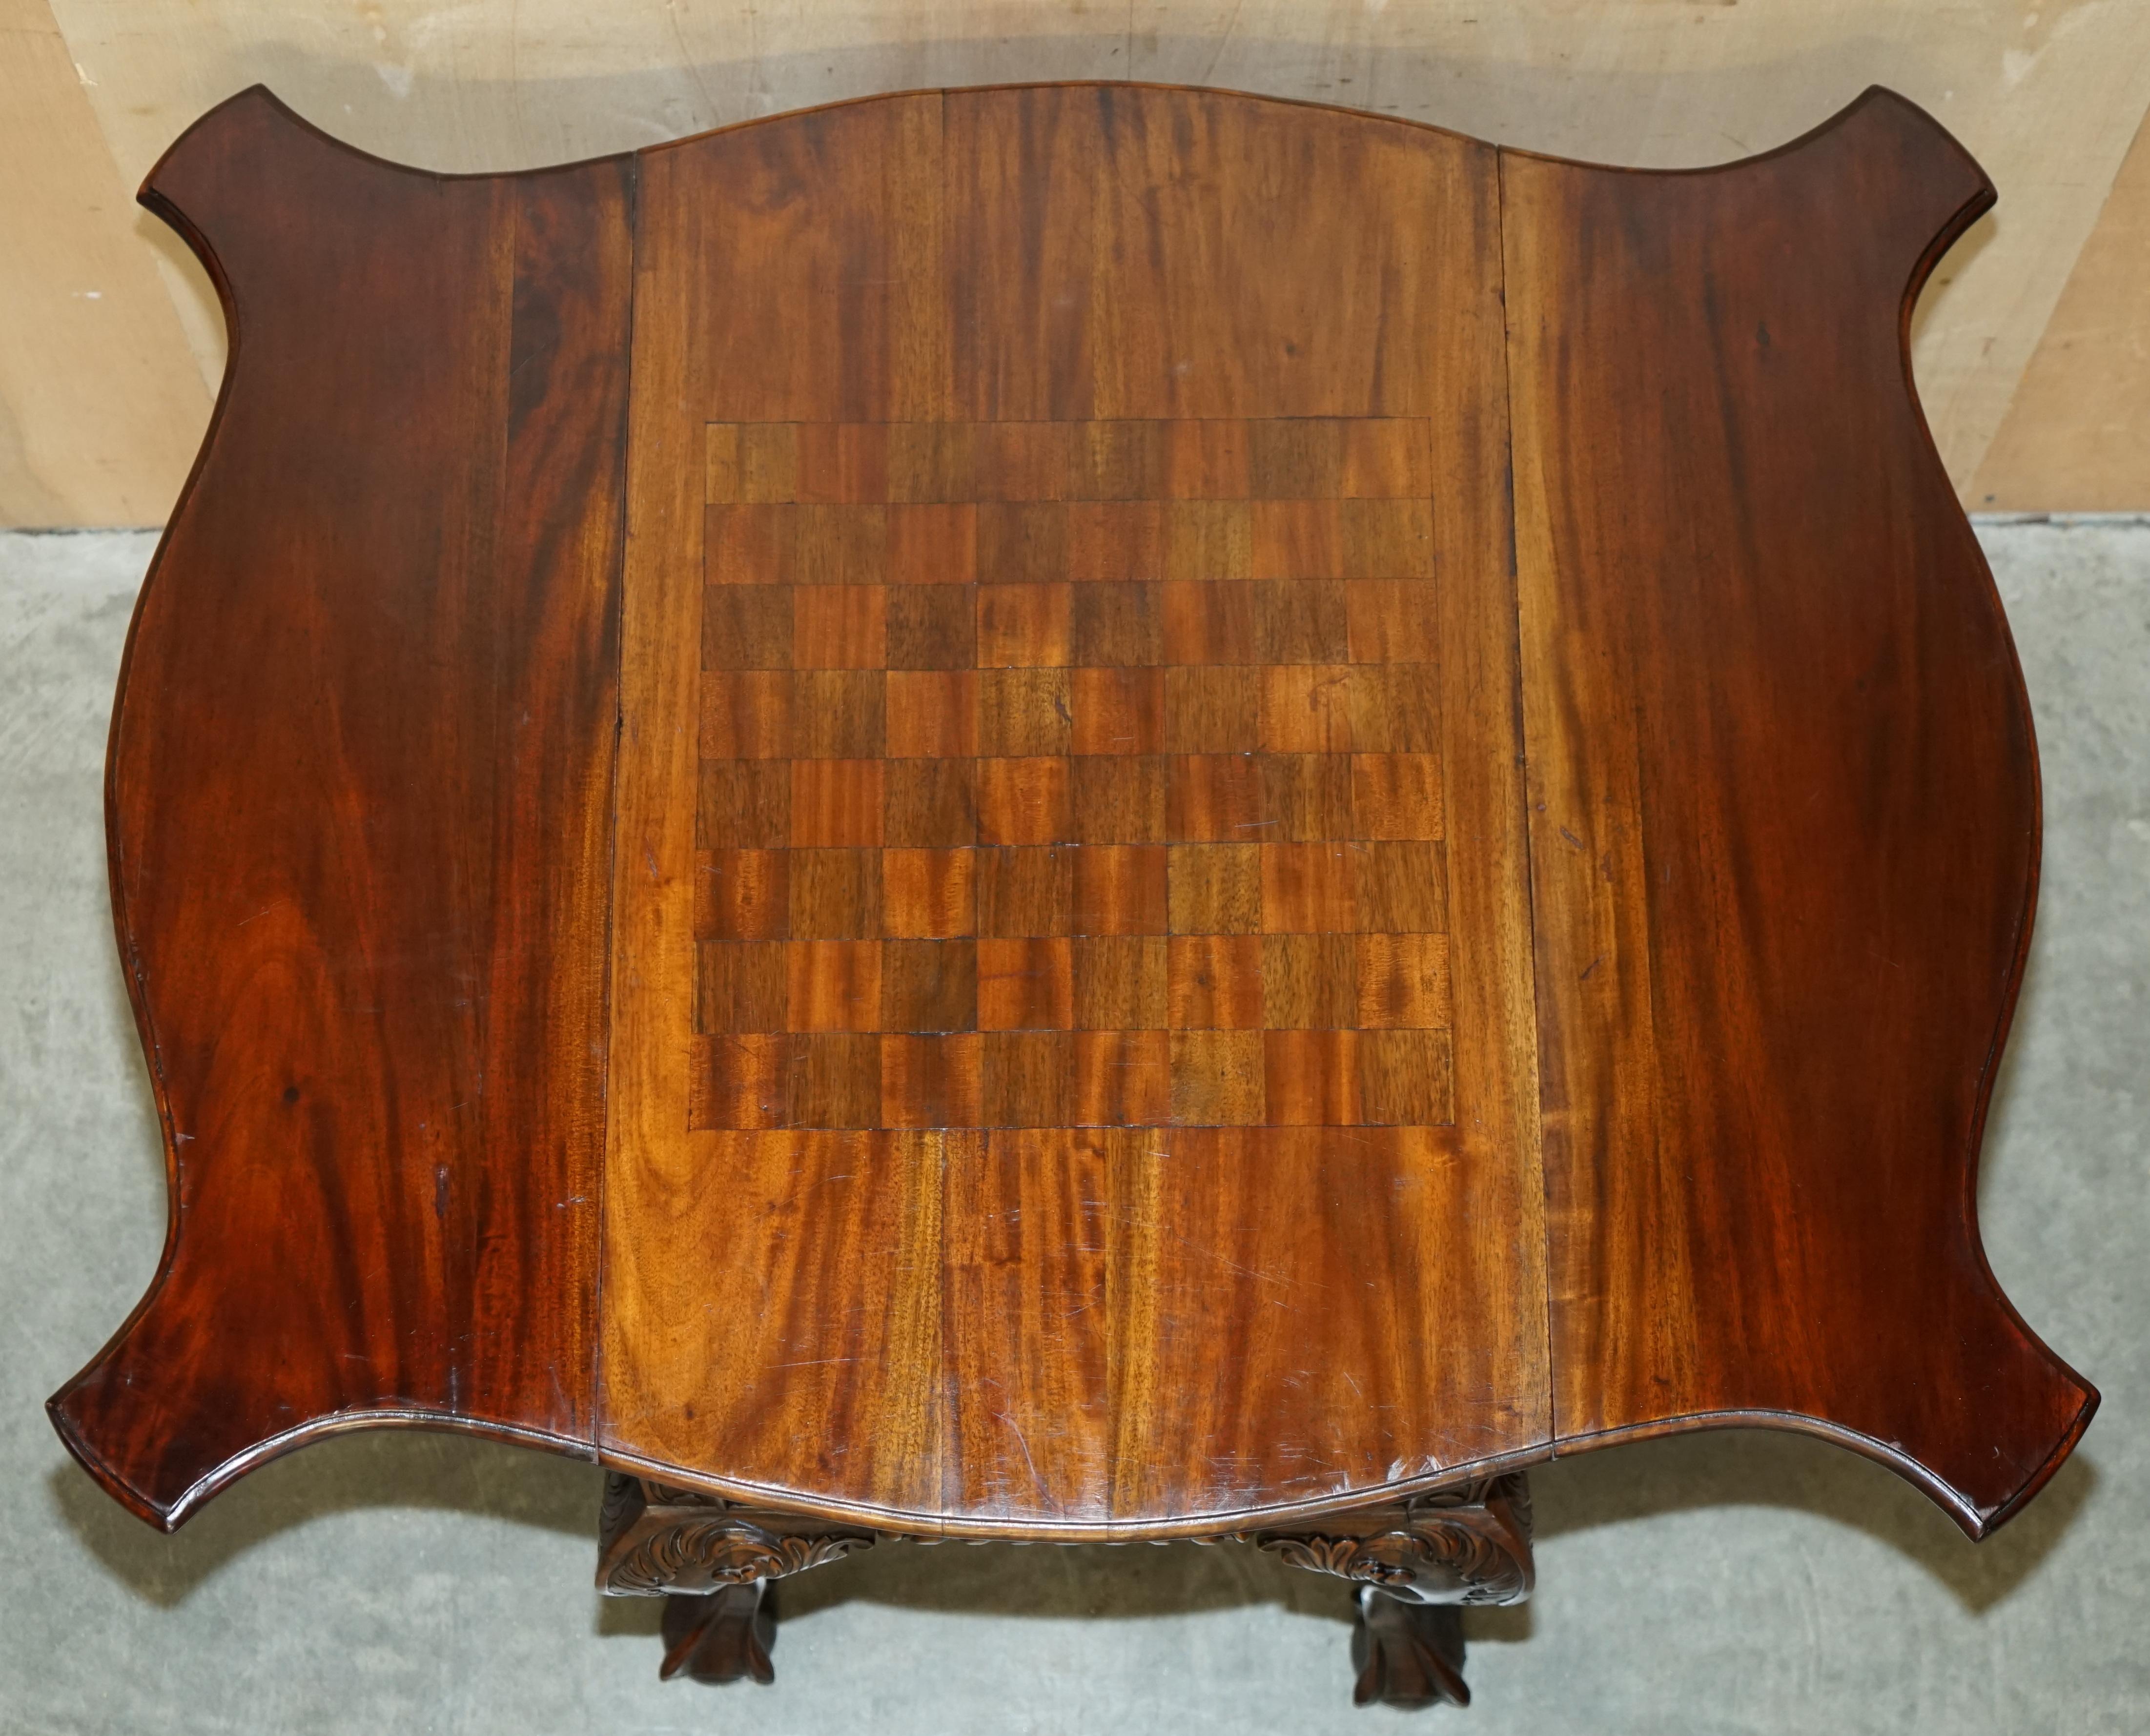 EXQUISITE THOMAS CHIPPENDALE STYLE CLAW & BALL FEET EXTENDiNG CHESS BOARD TABLE For Sale 3